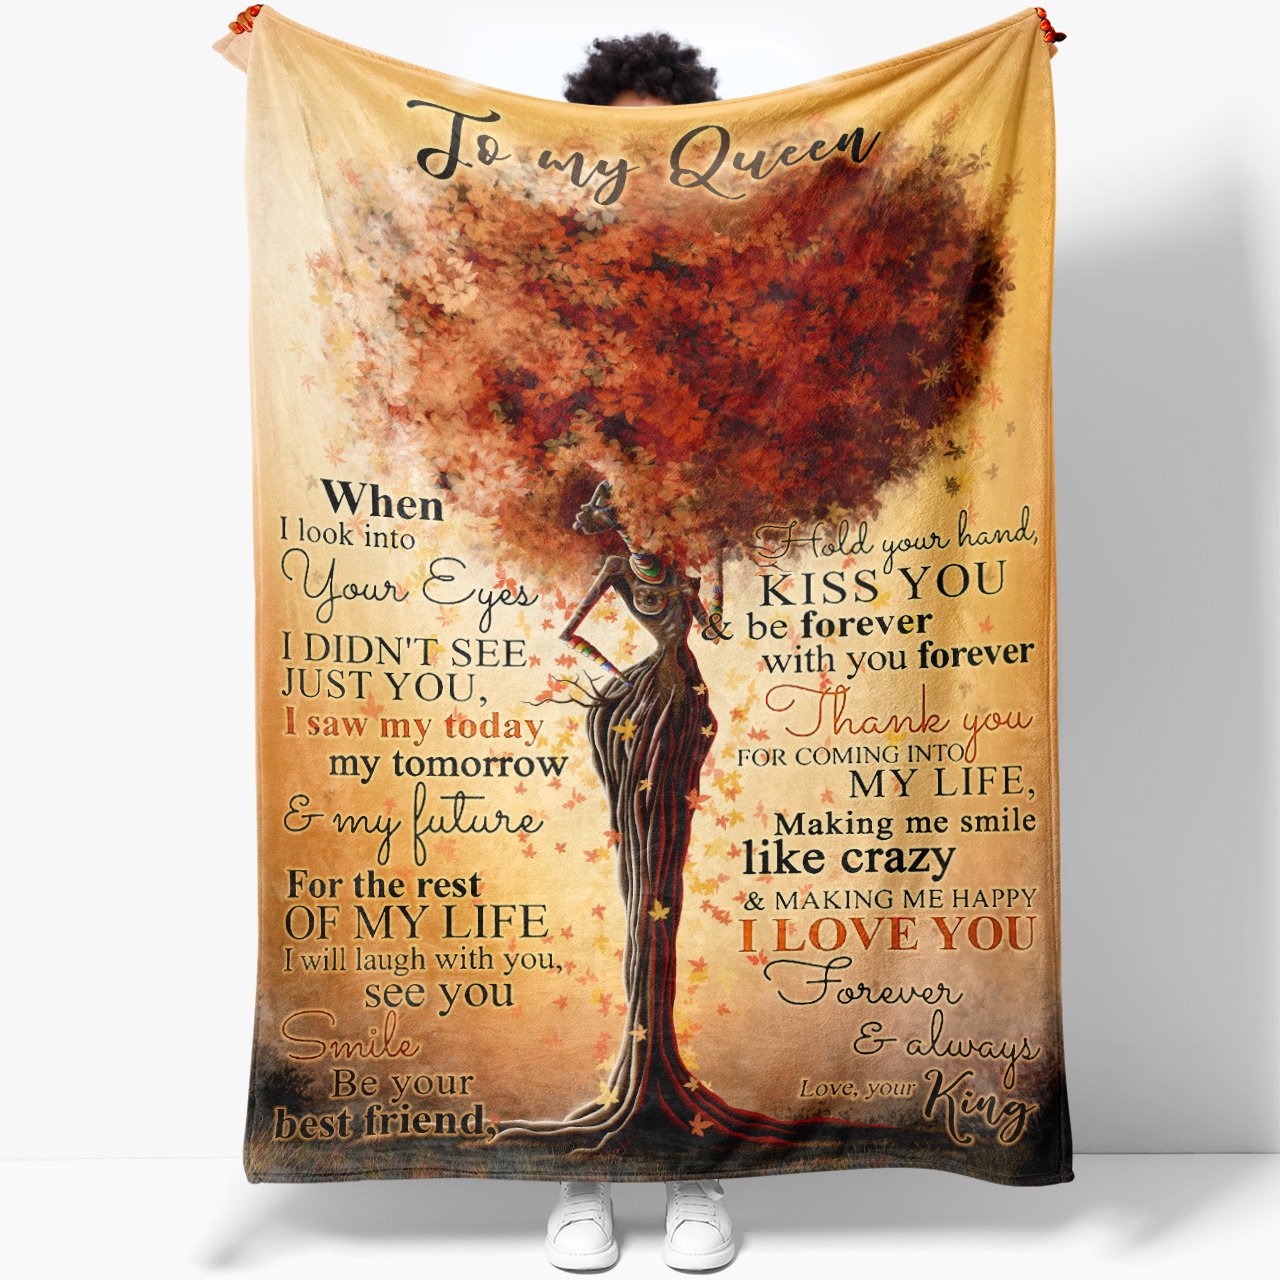 To My Afro Queen Blanket Gift for Black Queen, When I Look into Your Eyes Blanket, You're My Today Tomorrow Future Blanket, Anniversary Ideas For Her